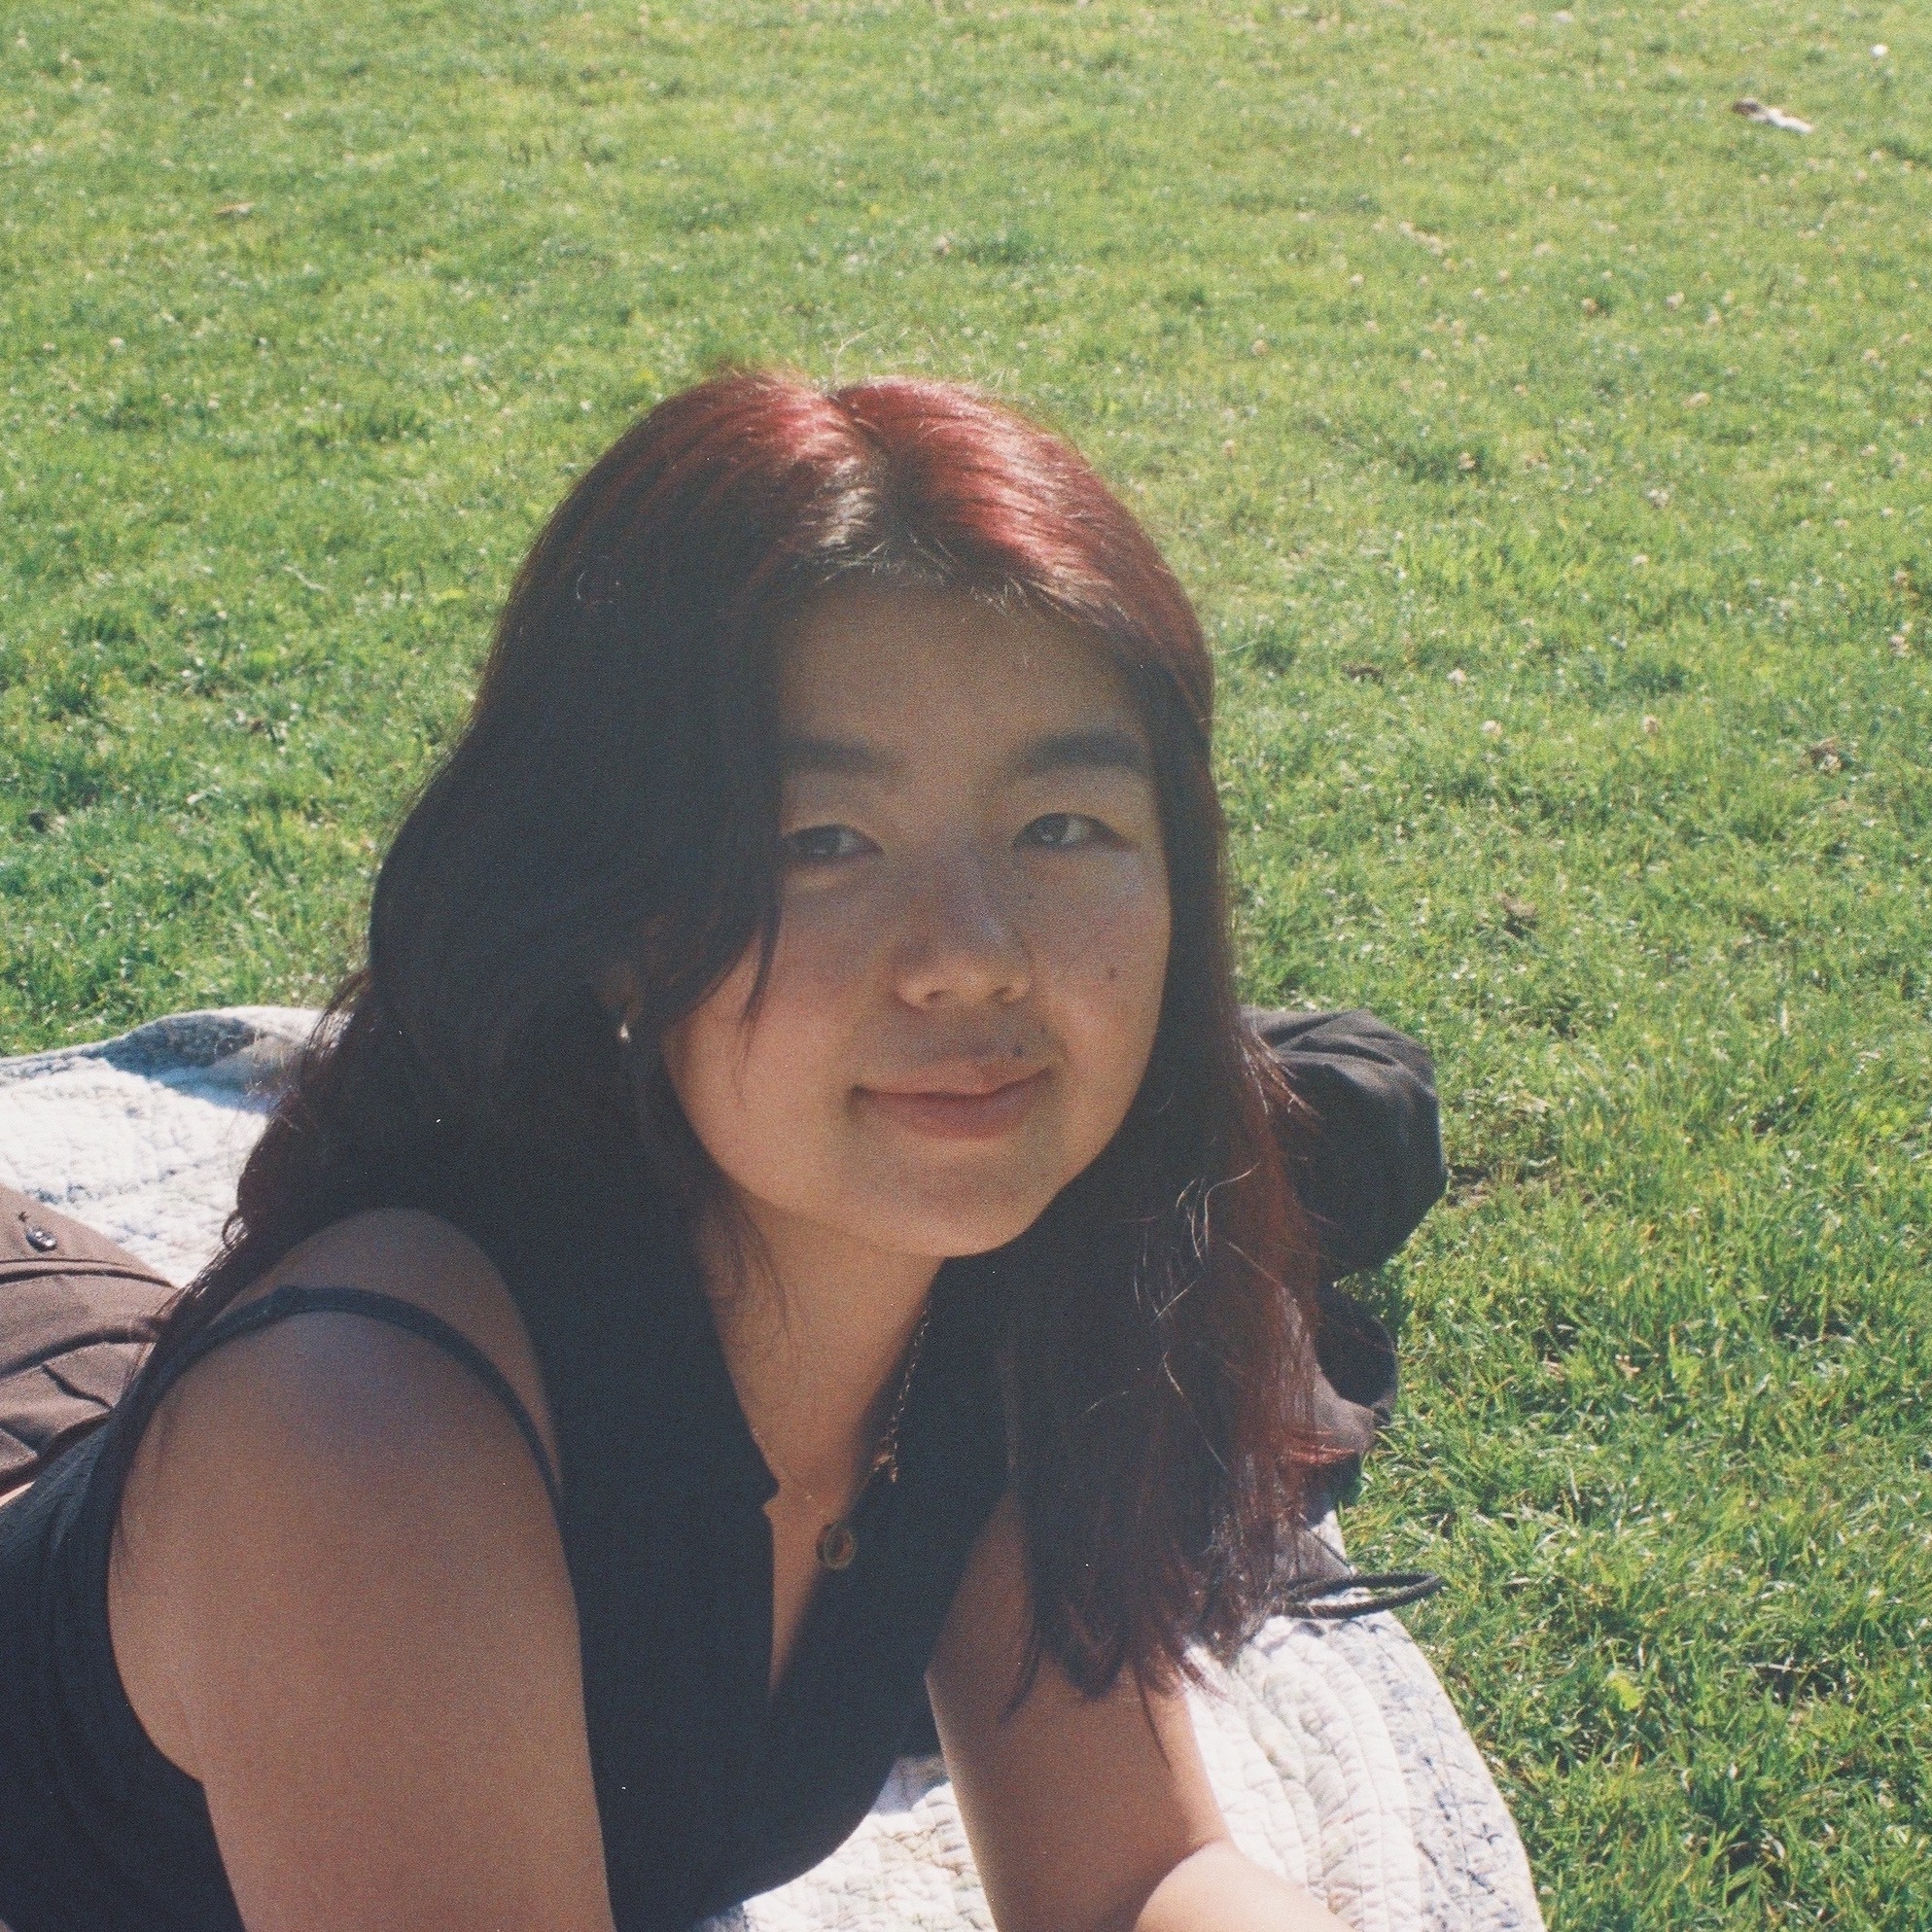 Renee at Mission Dolores Park